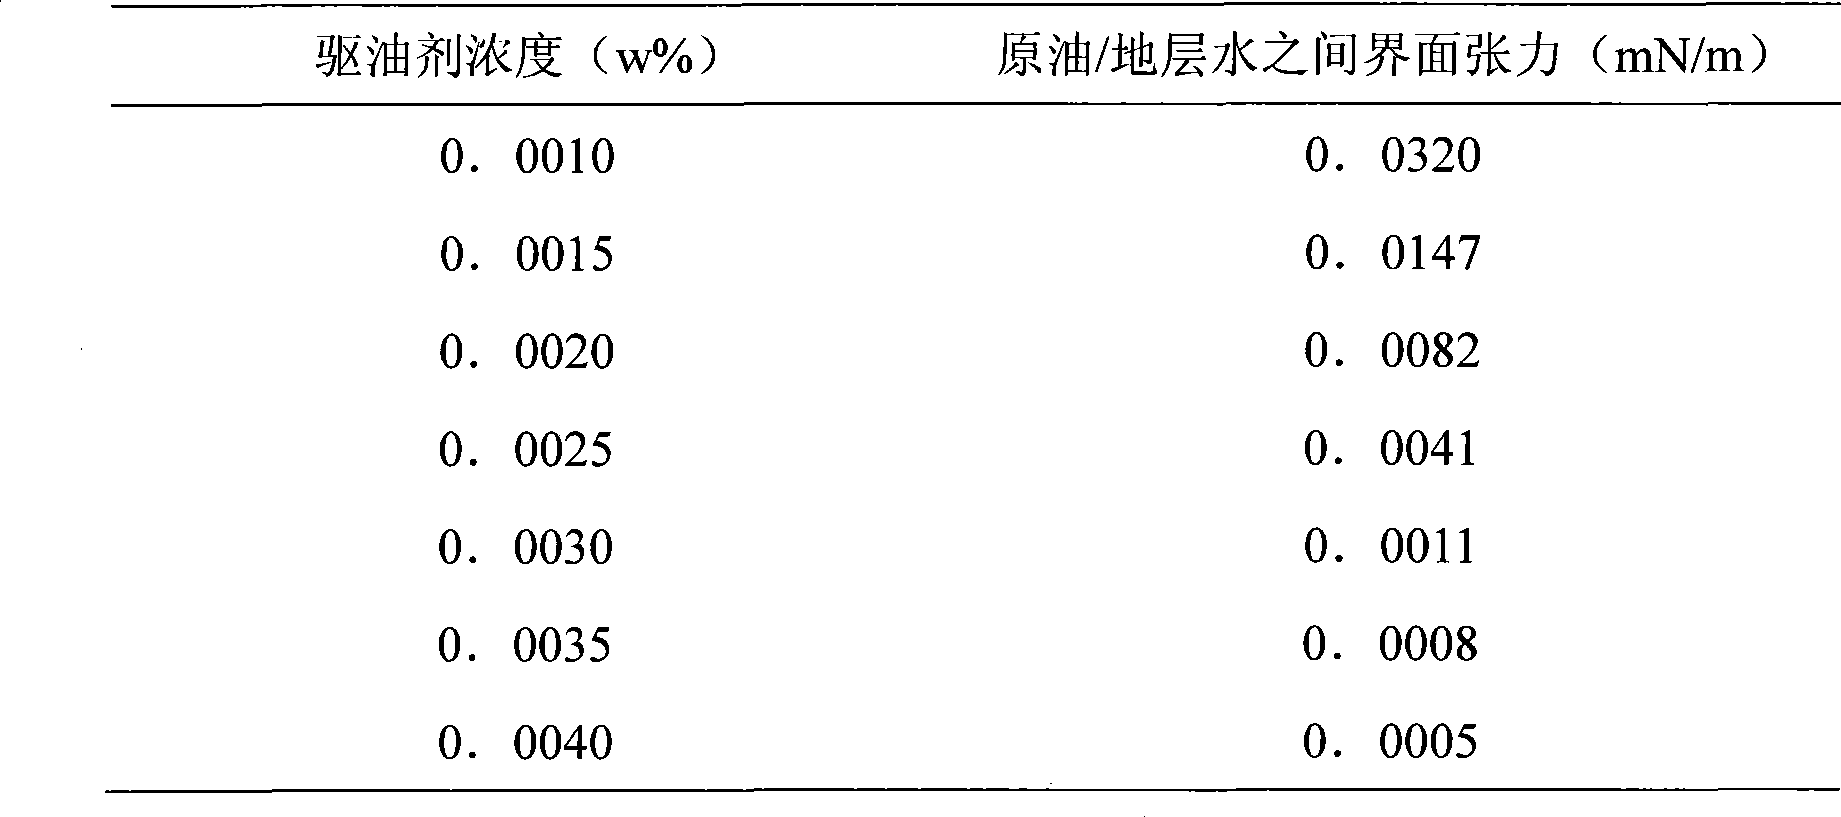 Oil displacement agent suitable for surfactant for low-permeability oilfield, and preparation method thereof